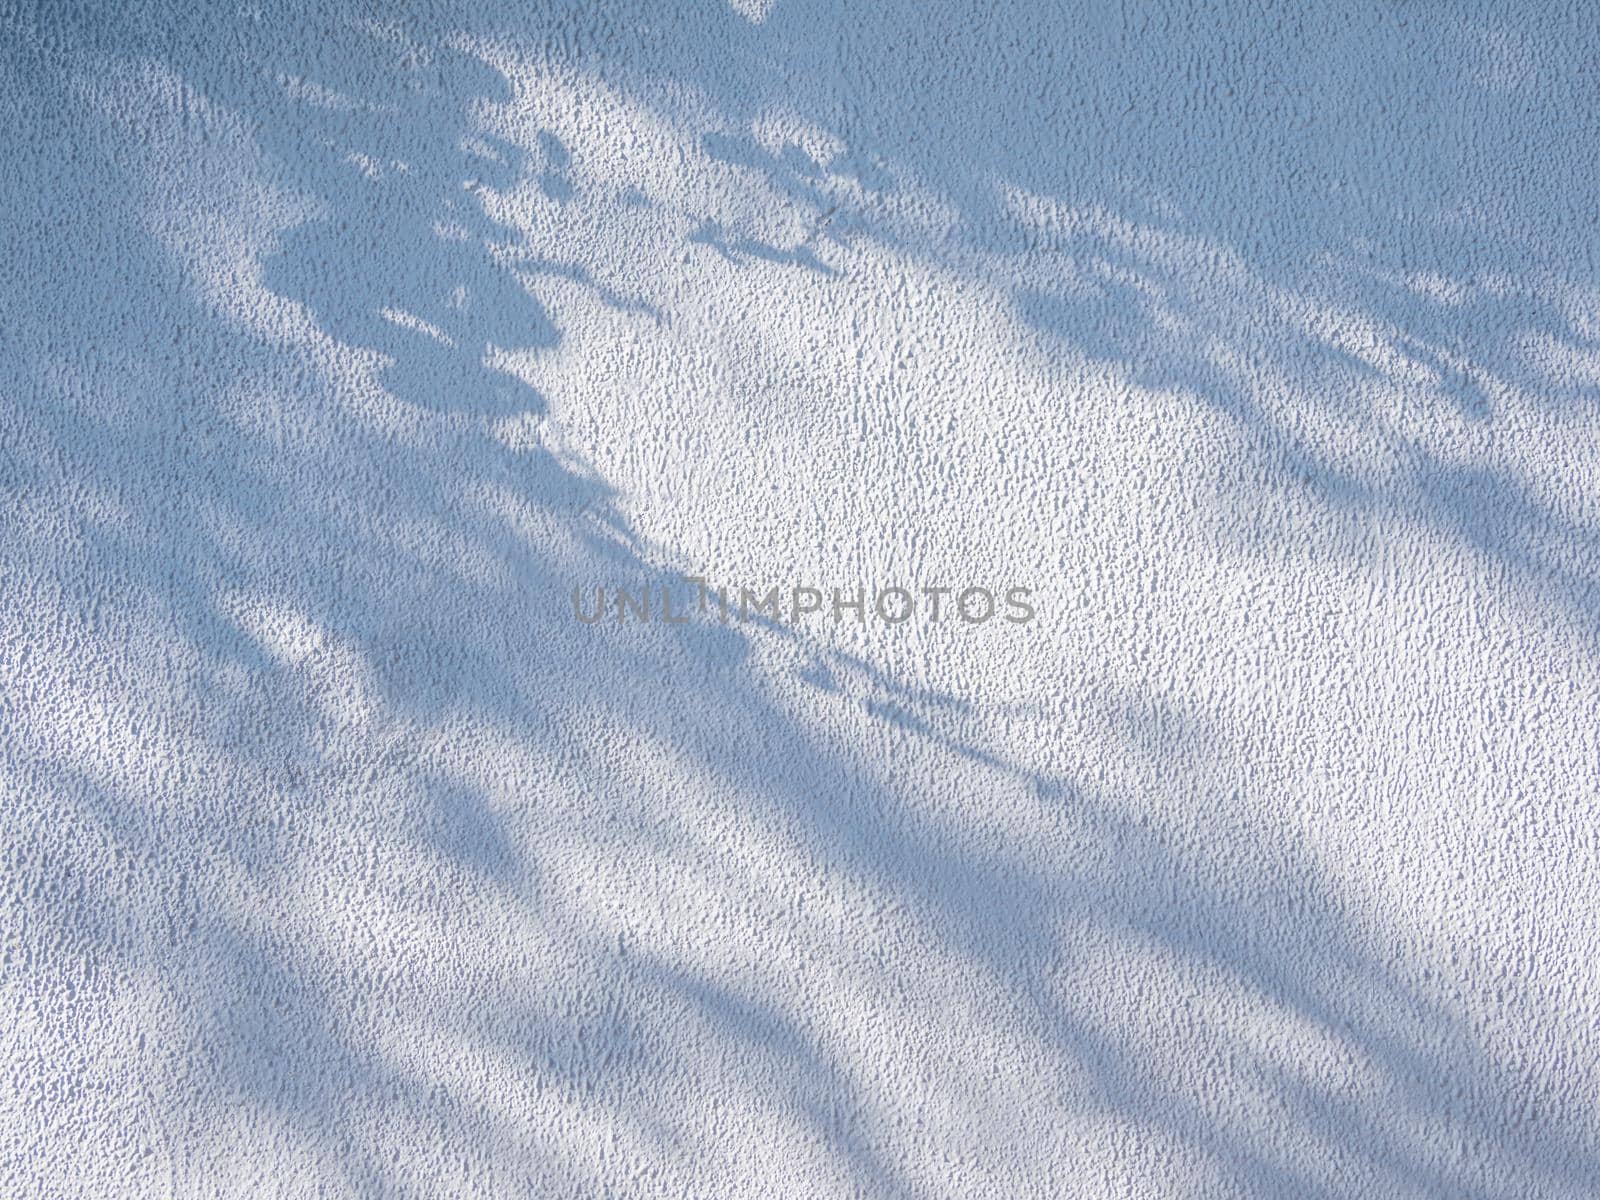 Lacy shadows from trees on white wall. Abstract background with concrete texture. by aksenovko